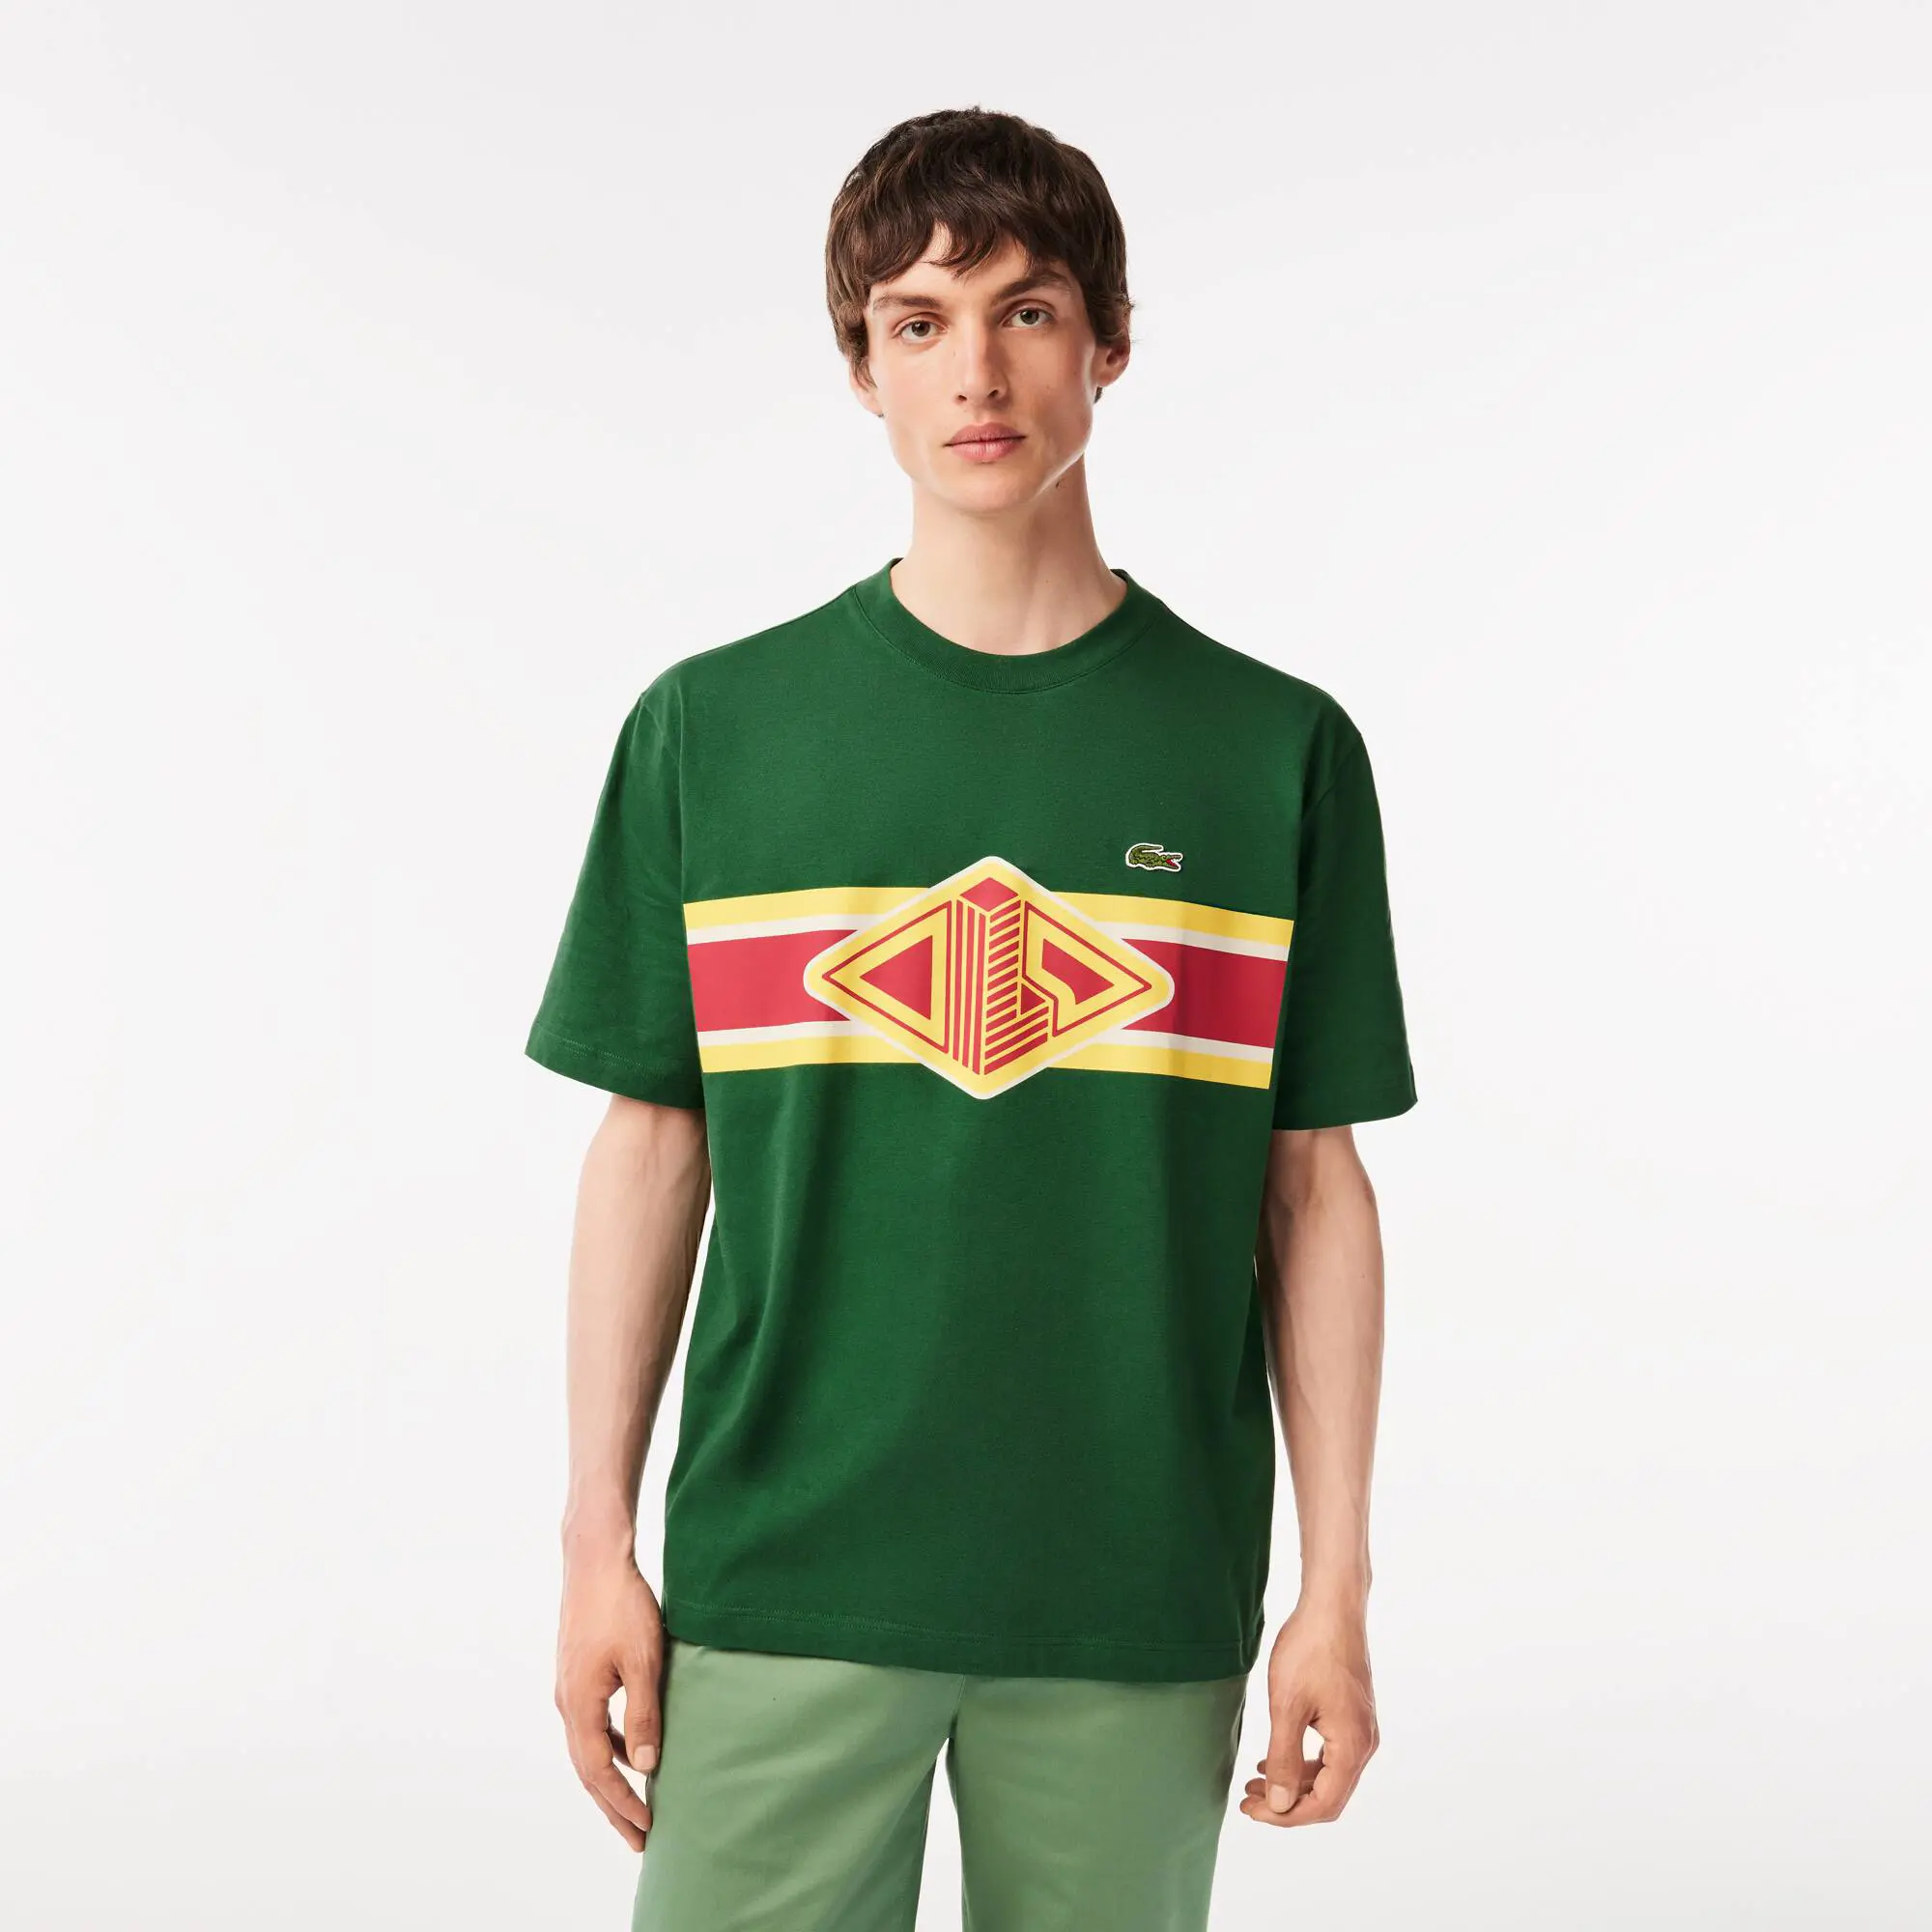 Lacoste Men’s Lacoste Round Neck Loose Fit Printed T-shirt. 1